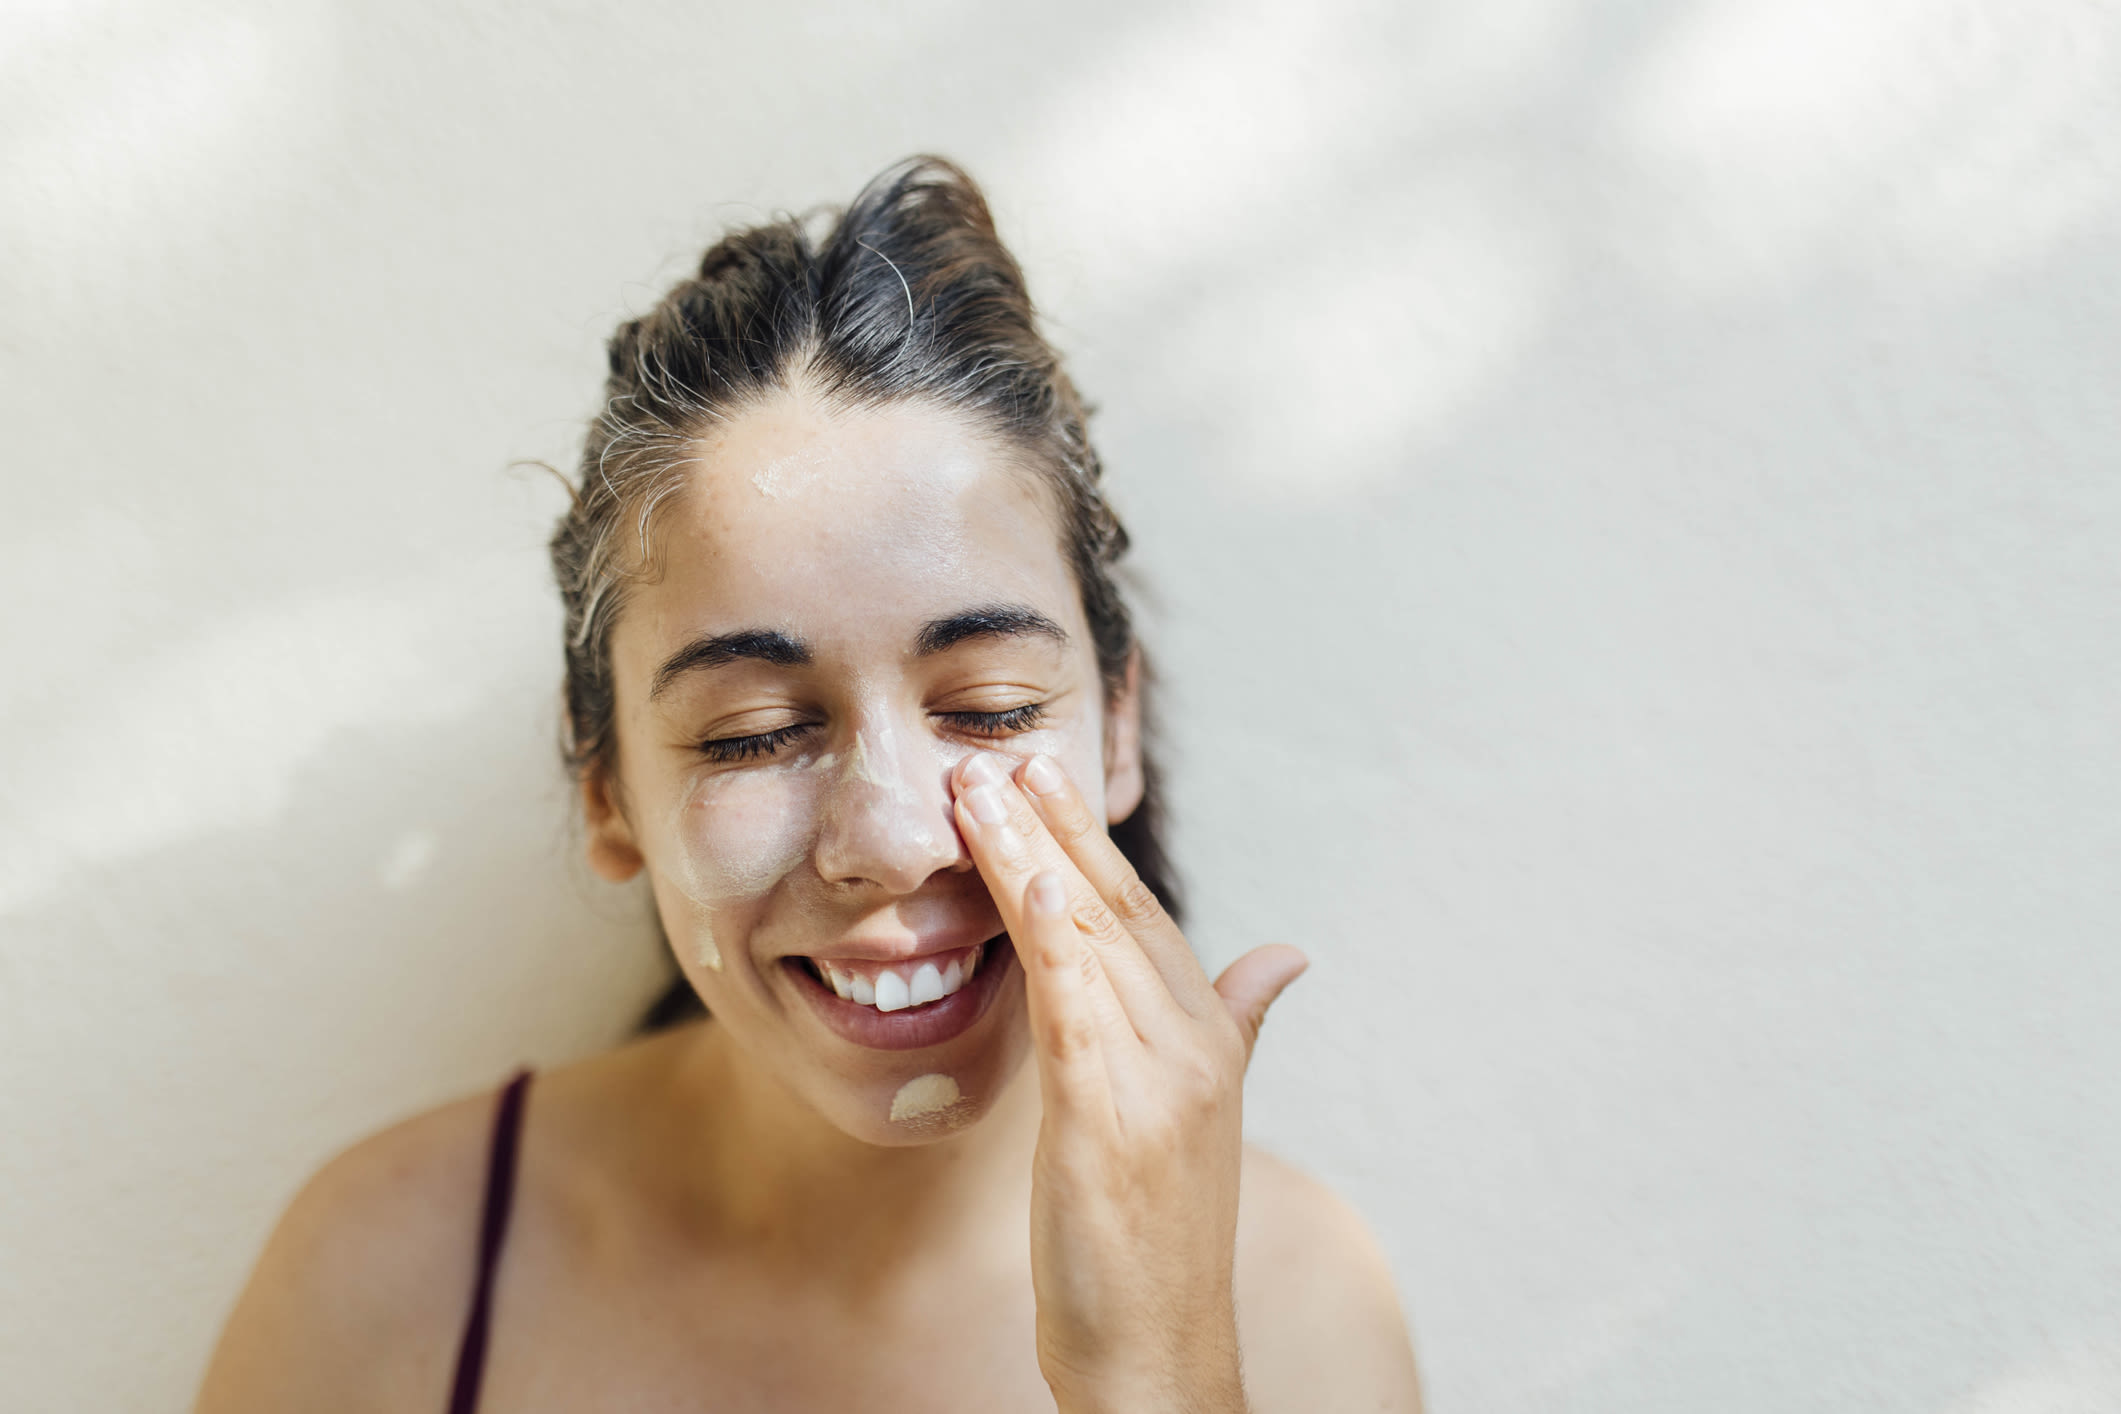 The exact amount of SPF you need to apply everyday